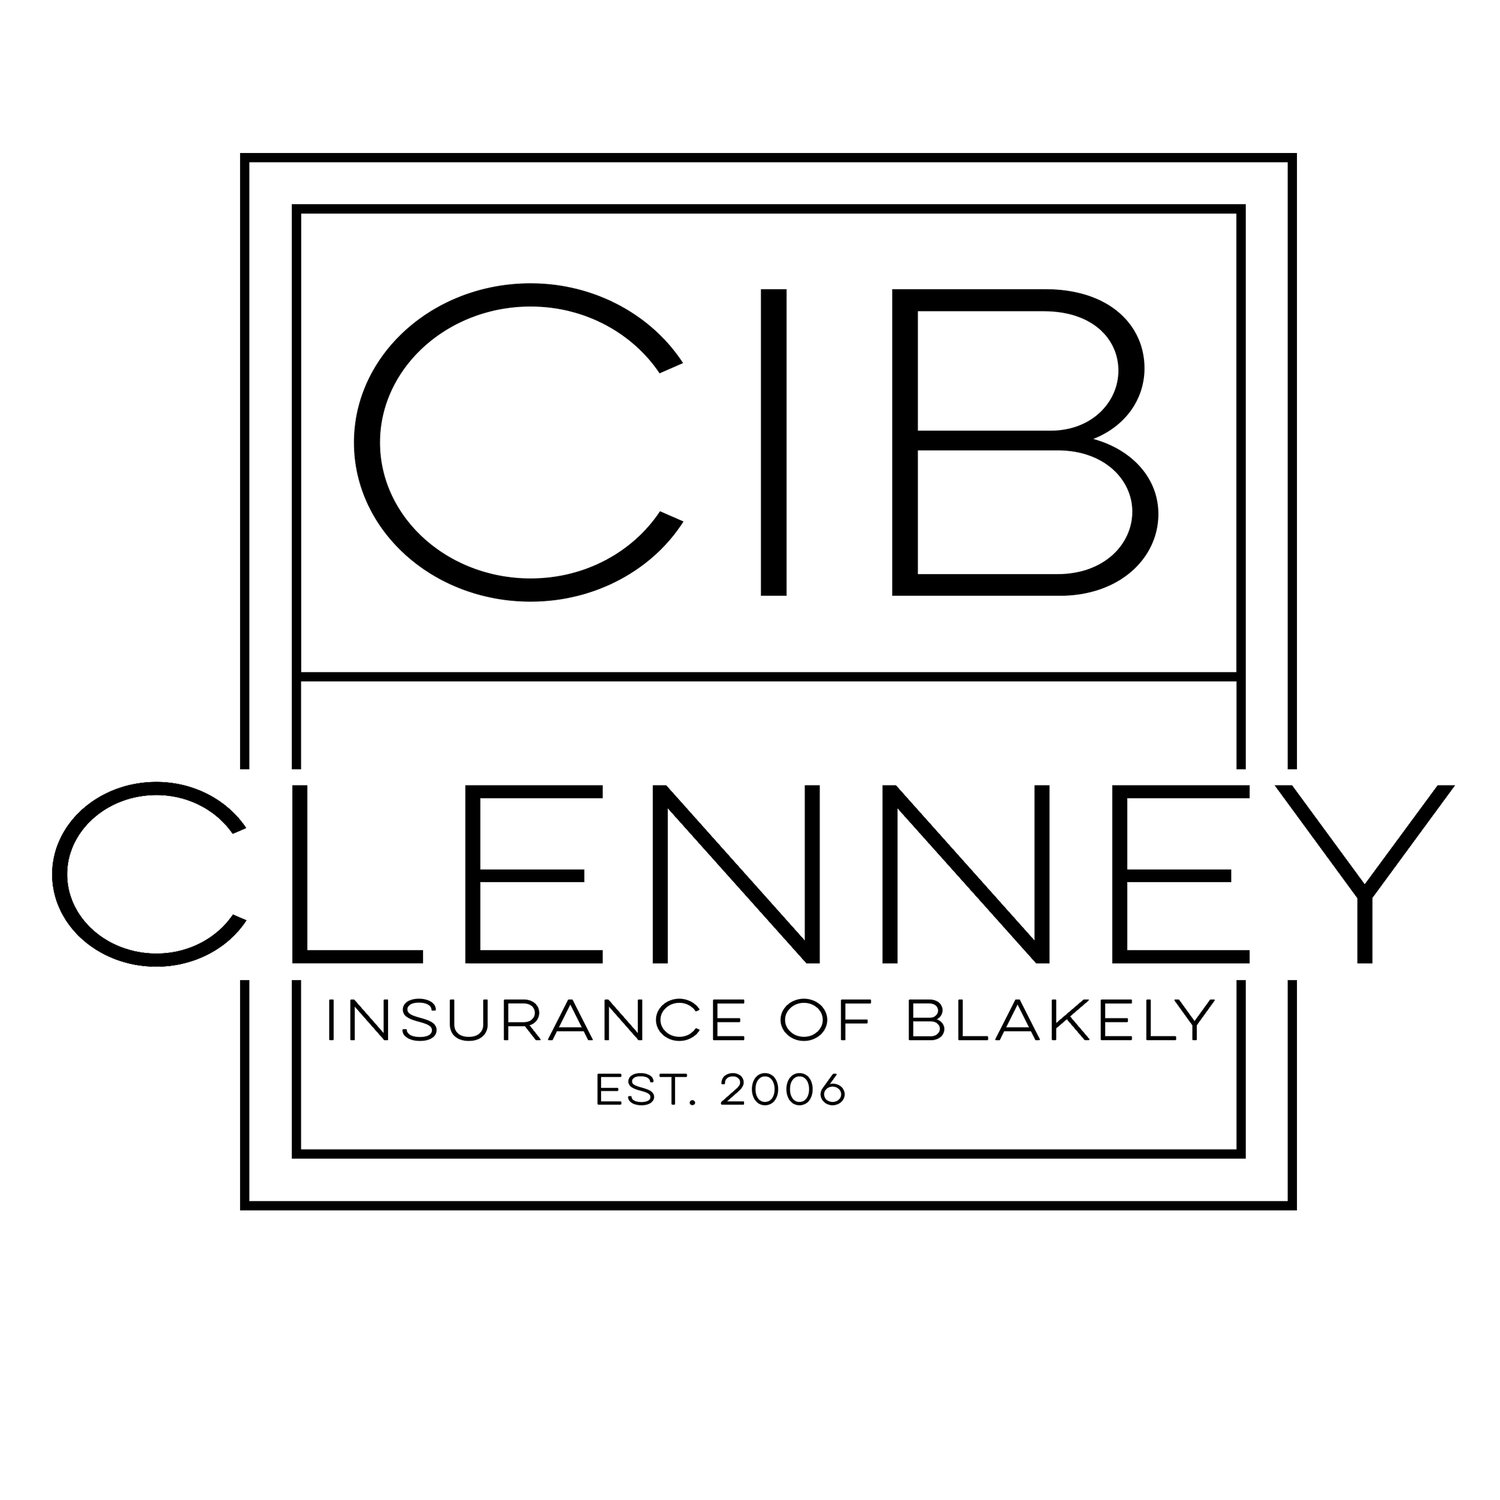 Clenney Insurance of Blakely